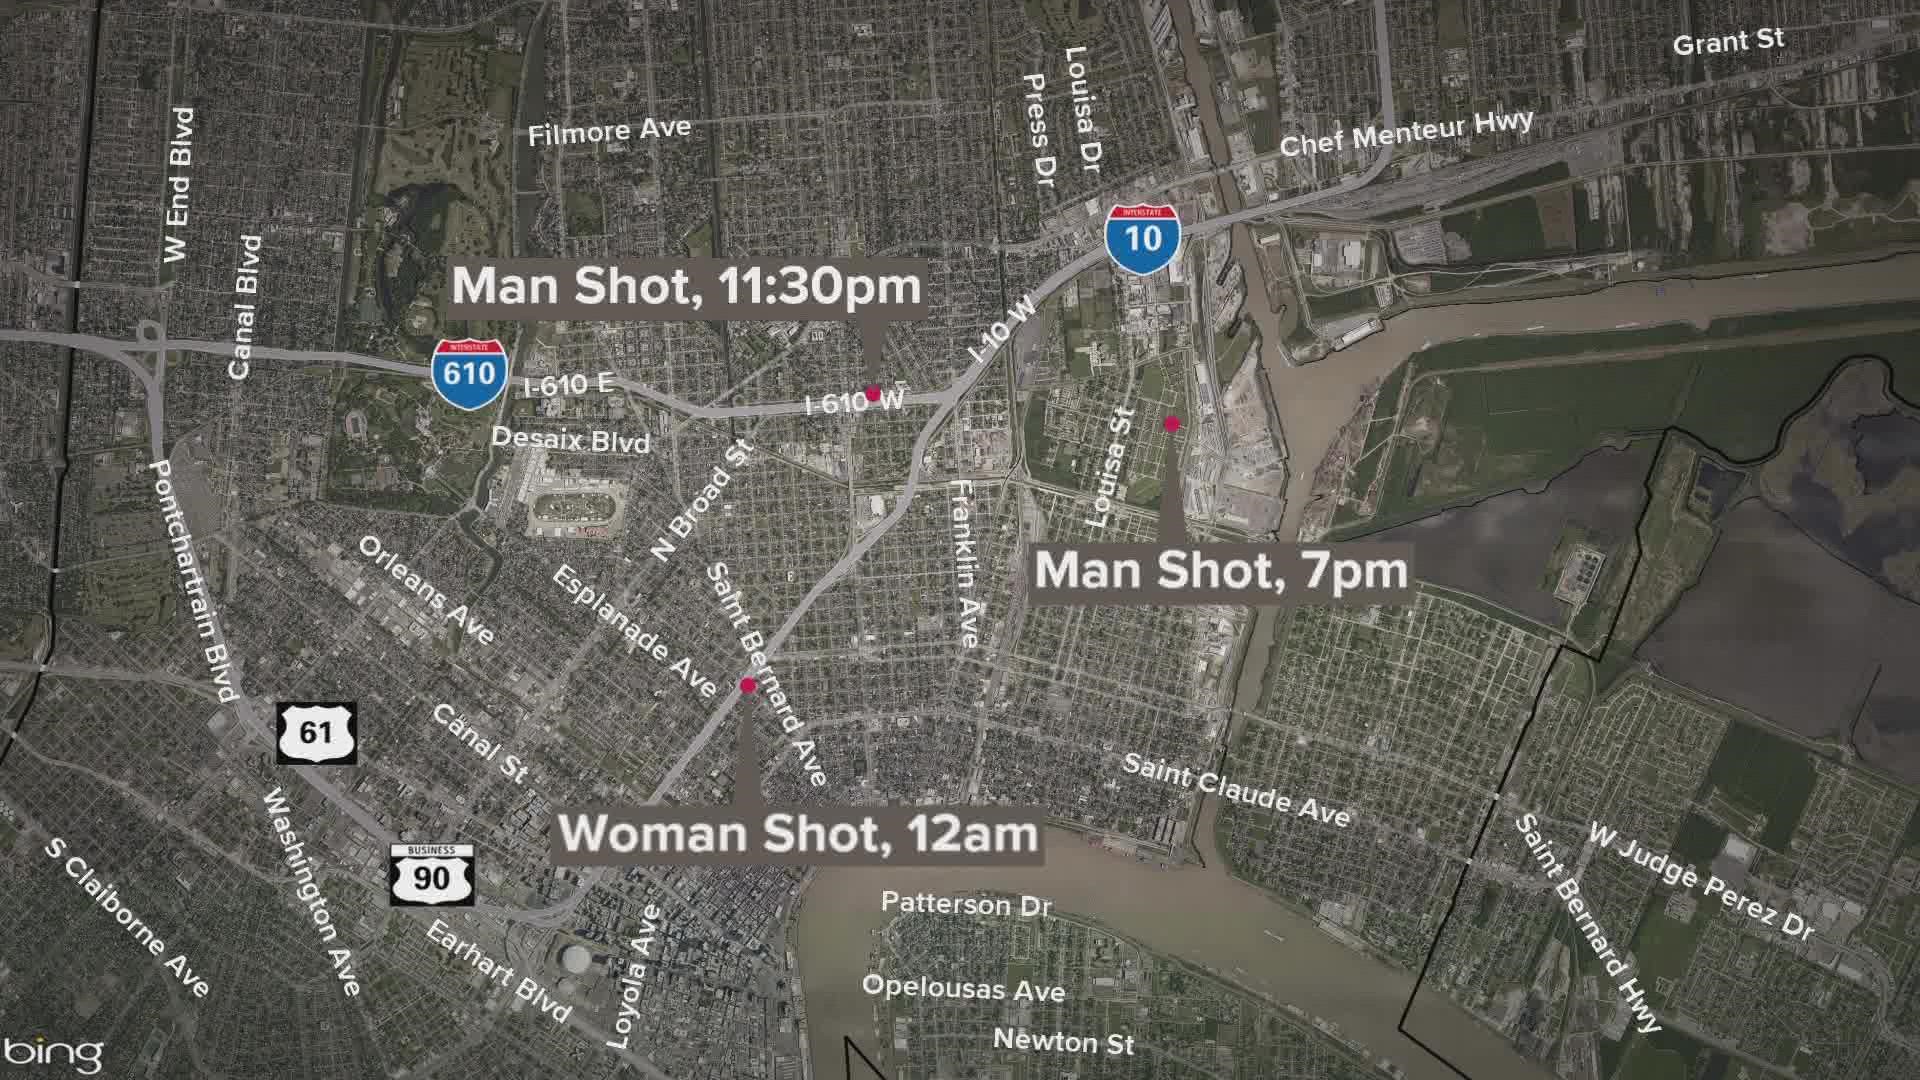 5 shot in 5 hours in New Orleans on Sunday.